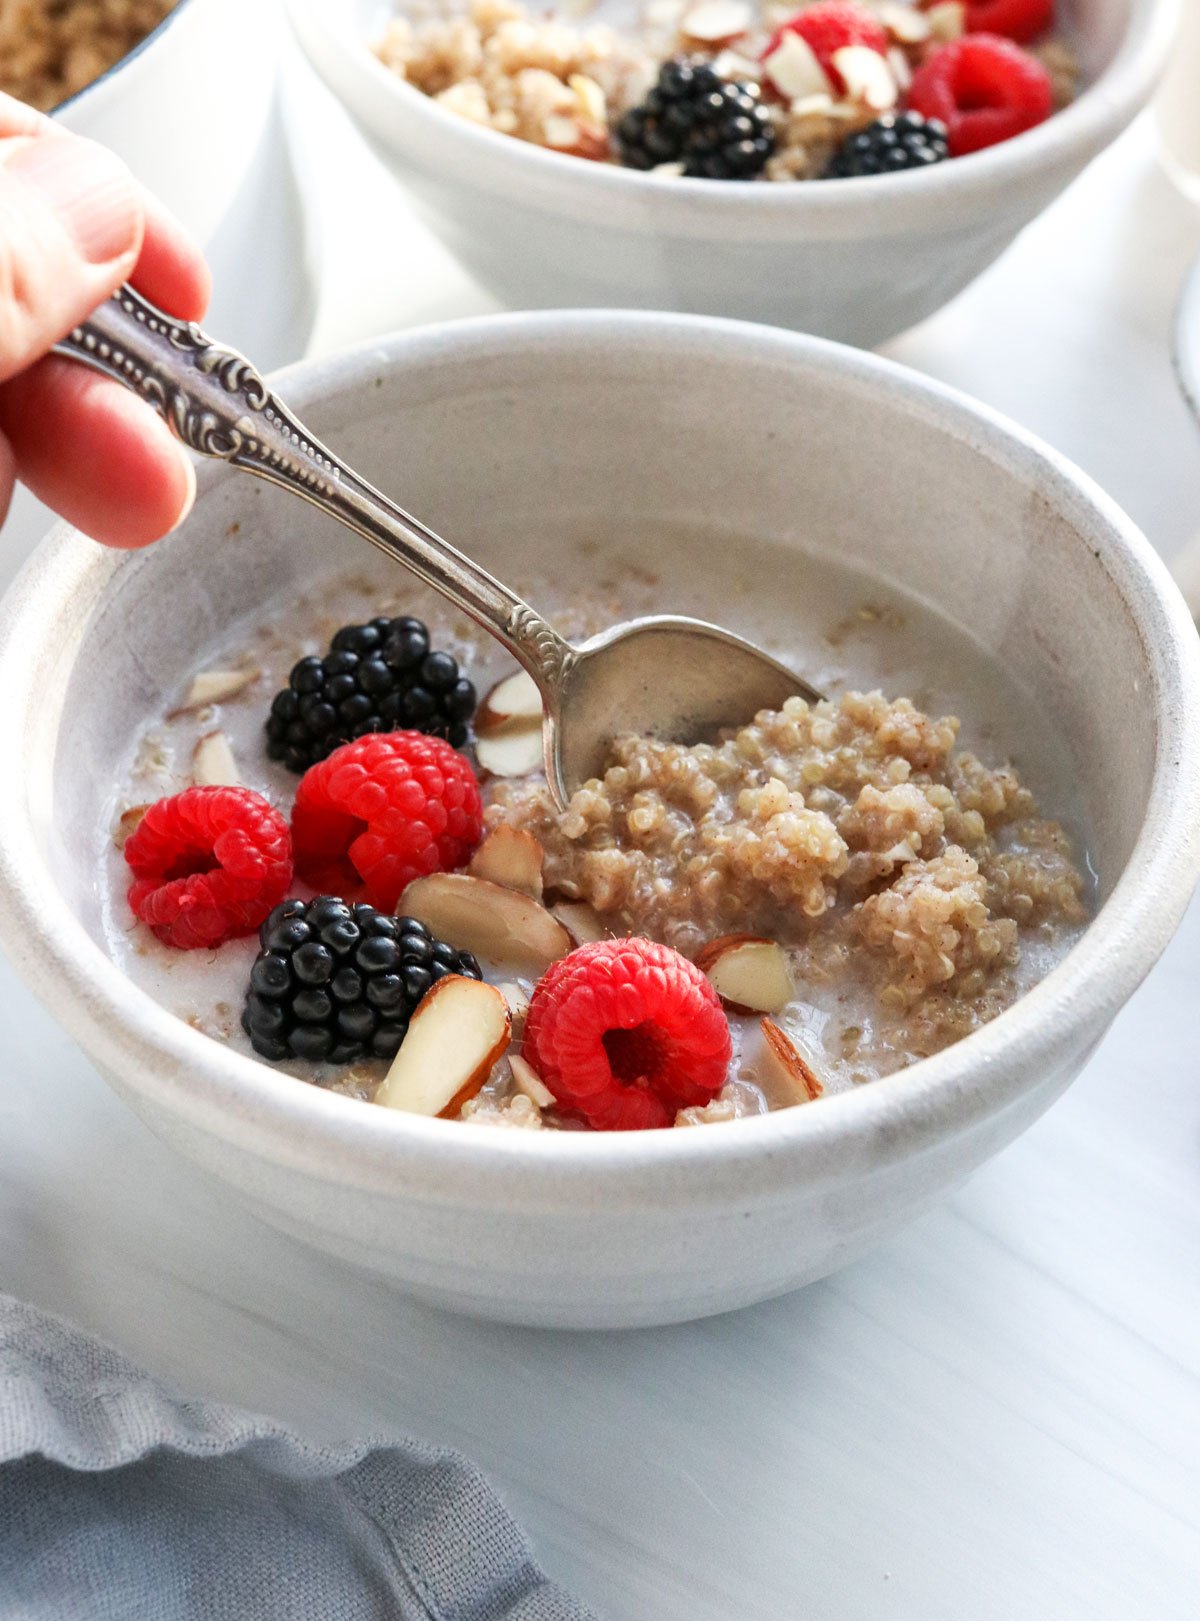 a spoon lifting up some quinoa porridge from a bowl with fruit.